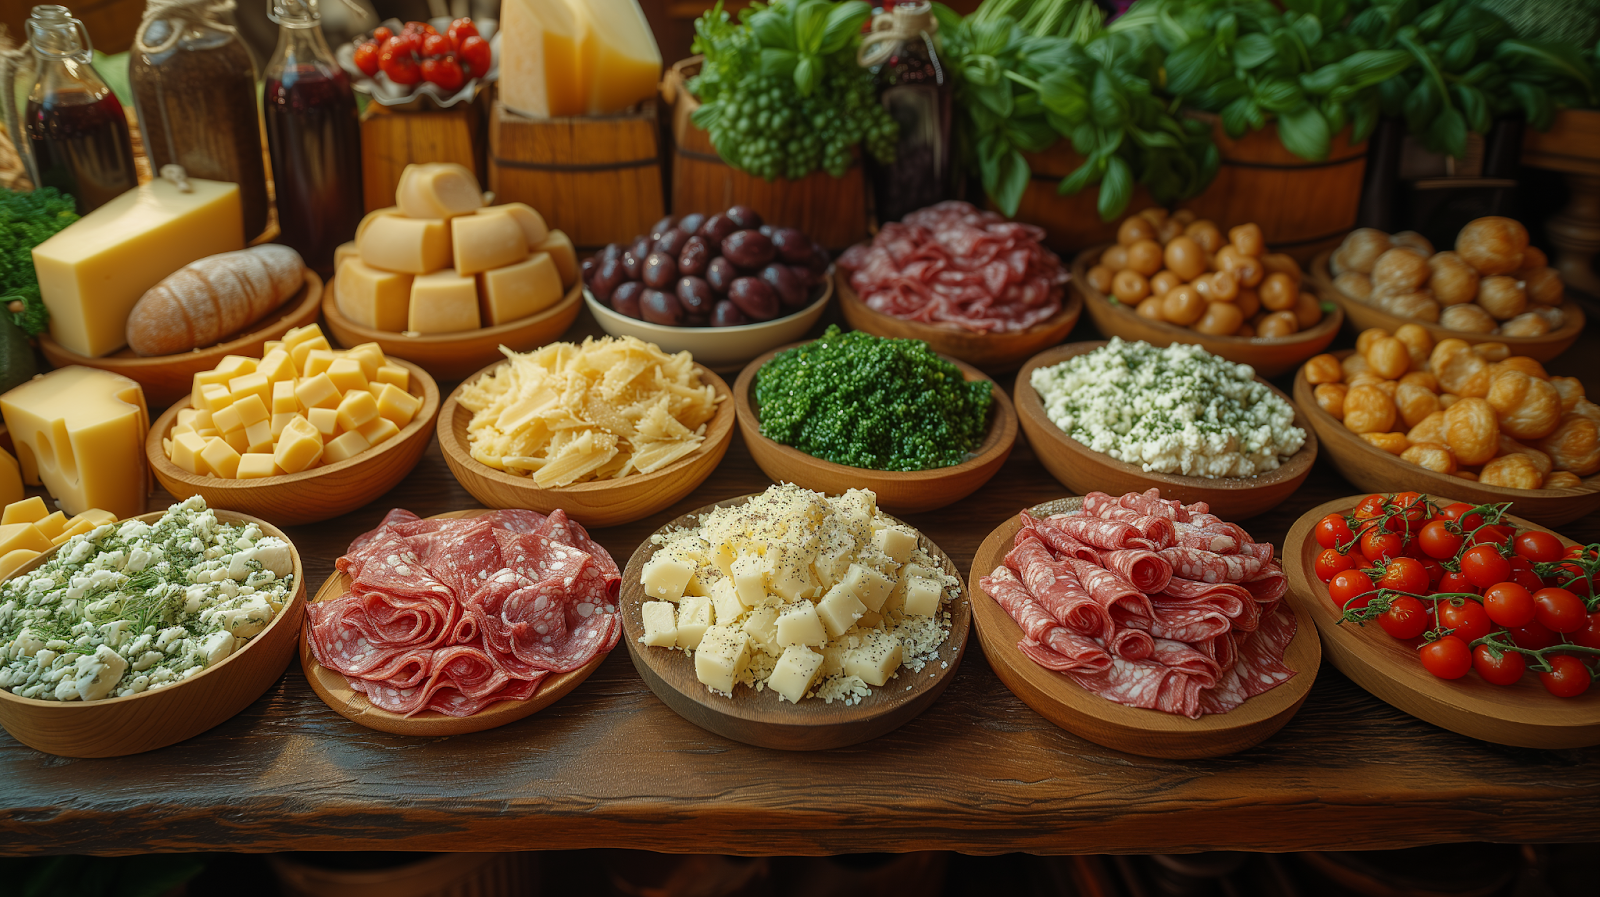 Common ingredients of Bolognese cuisine